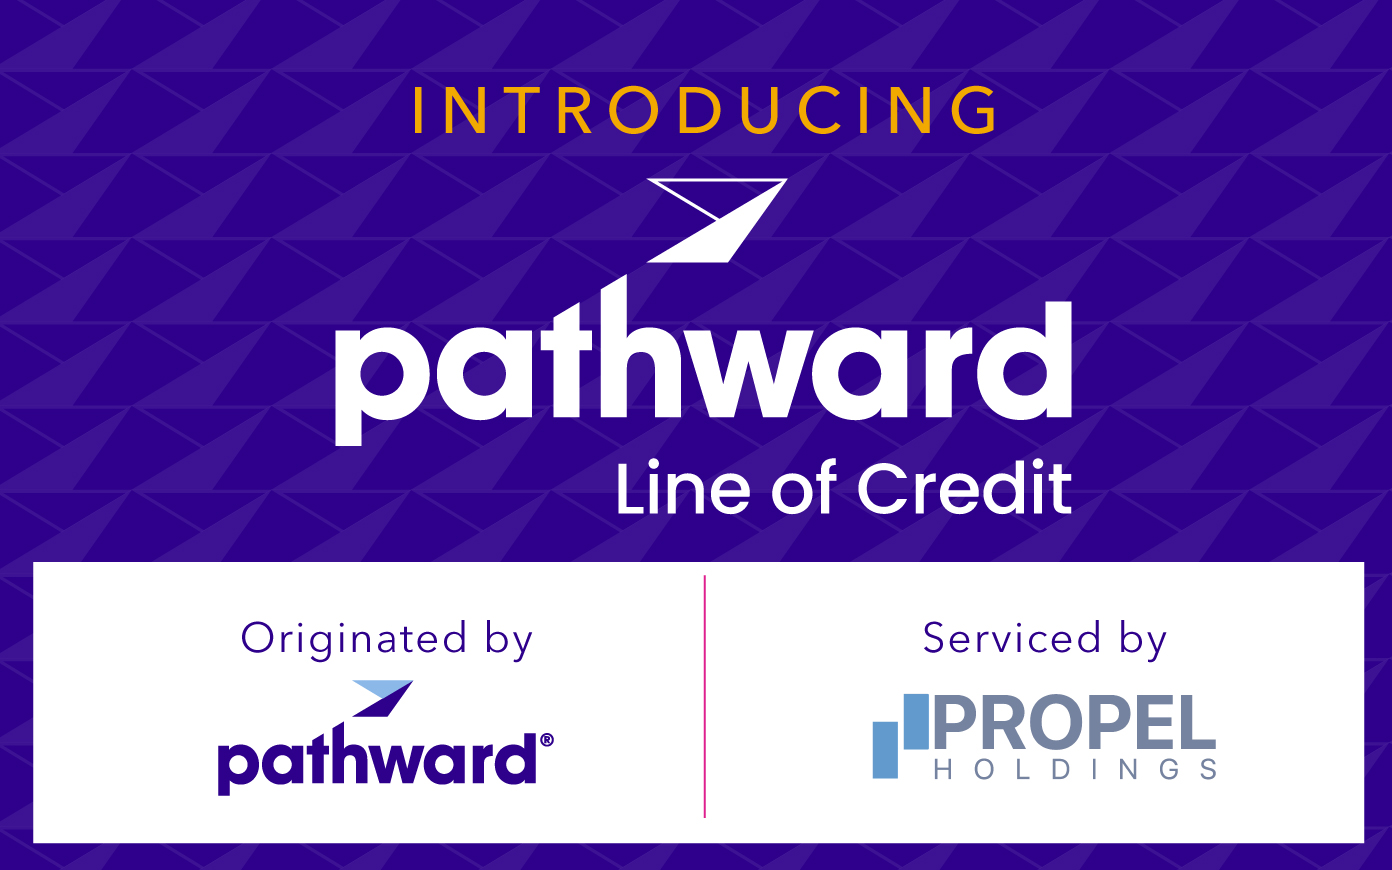 Pathward partners with Propel